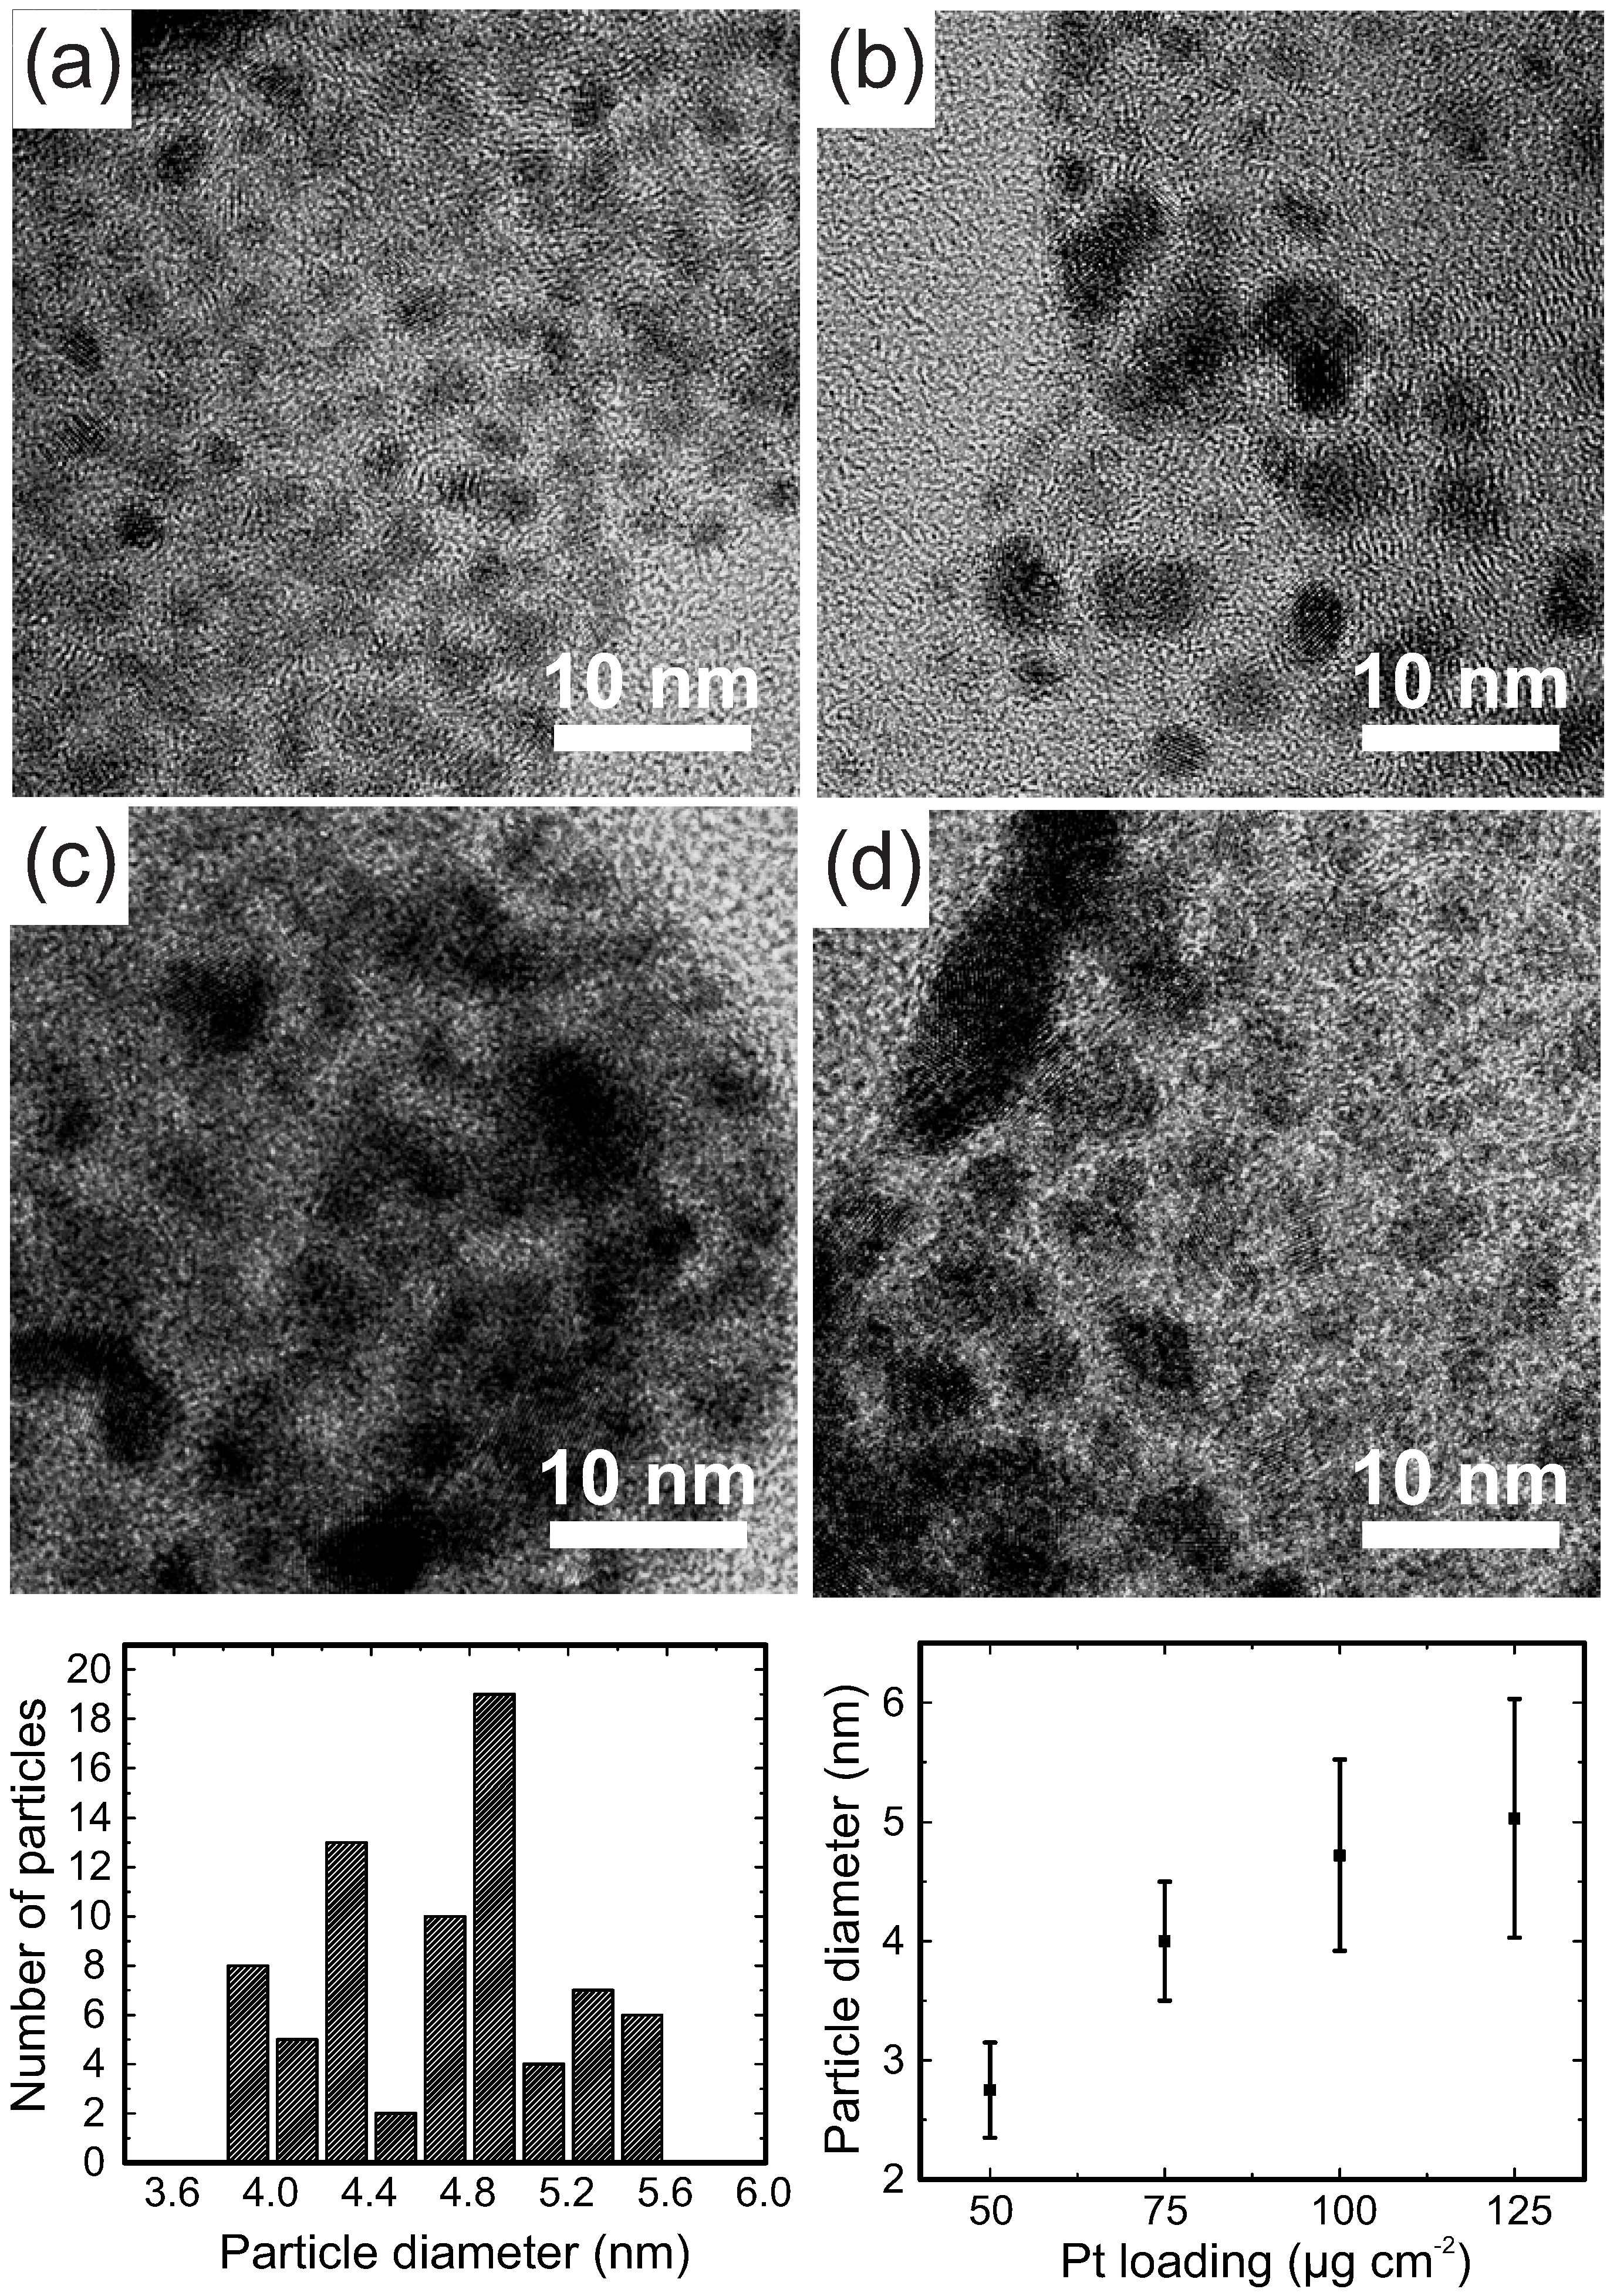 Catalysts Free Full Text Pulsed Laser Deposition Of Platinum Nanoparticles As A Catalyst For High Performance Pem Fuel Cells Html